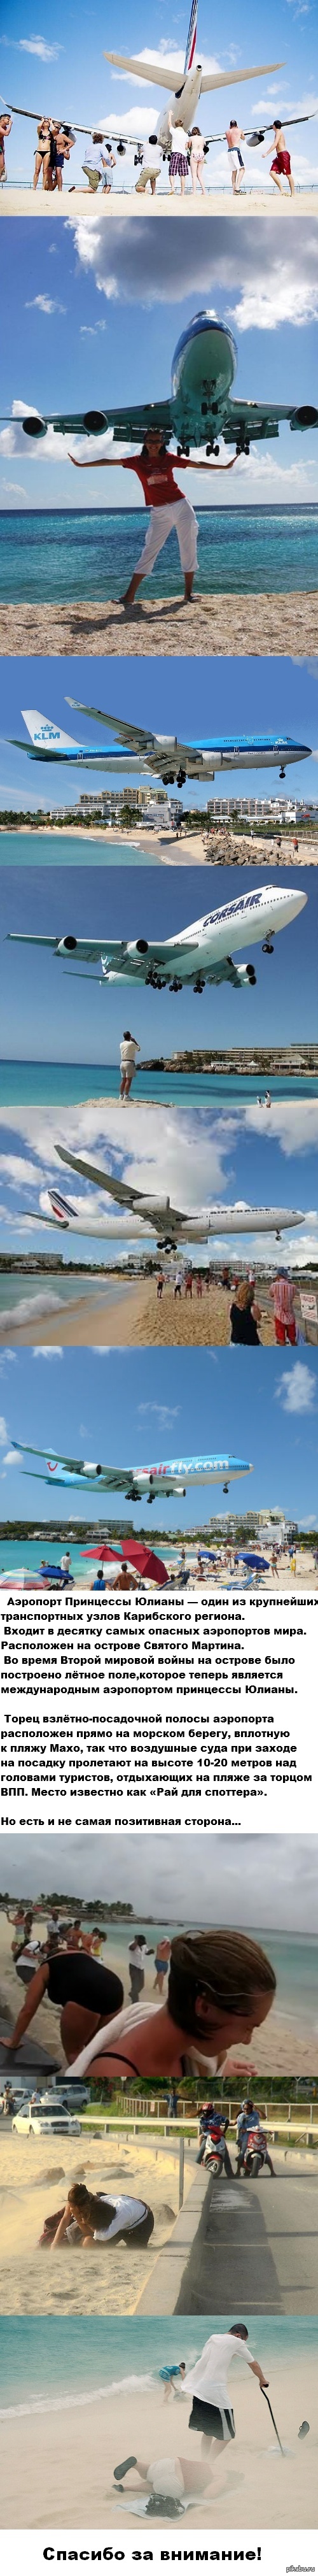 Princess Juliana Airport - The airport, Extreme, Impressions, Relaxation